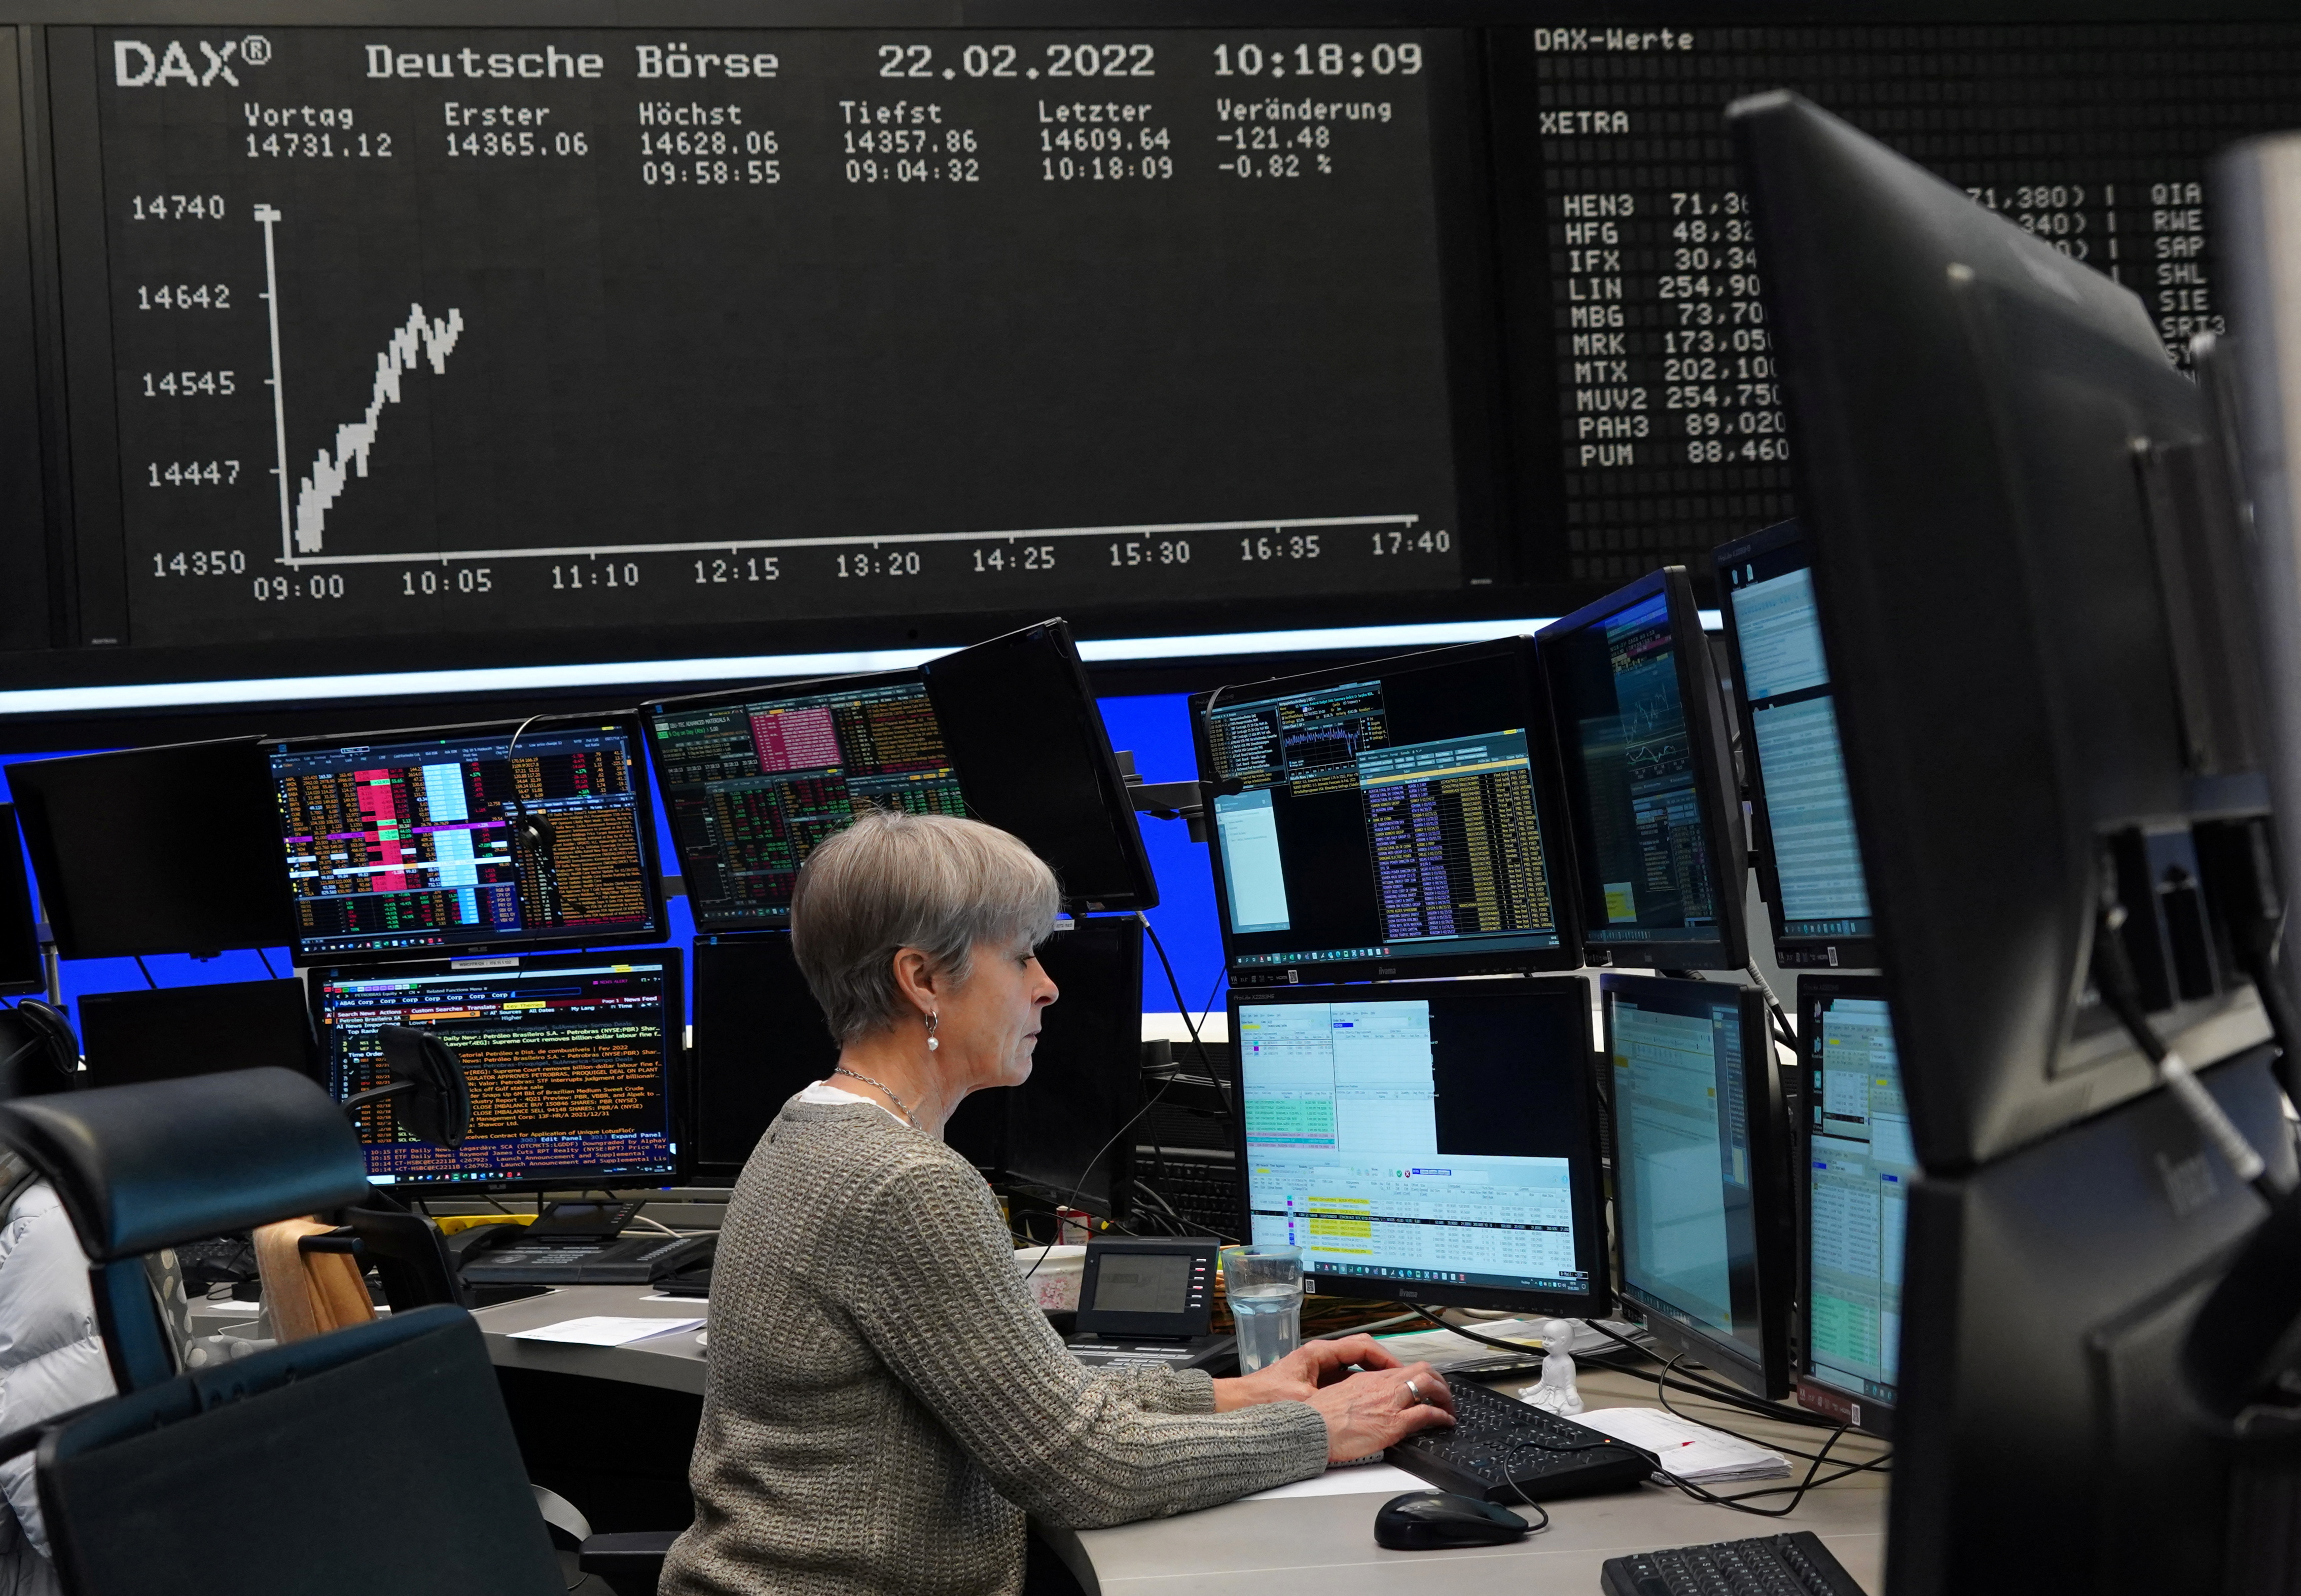 A trader works at the Frankfurt stock exchange in Frankfurt, Germany, February 22, 2022. REUTERS/Timm Reichert